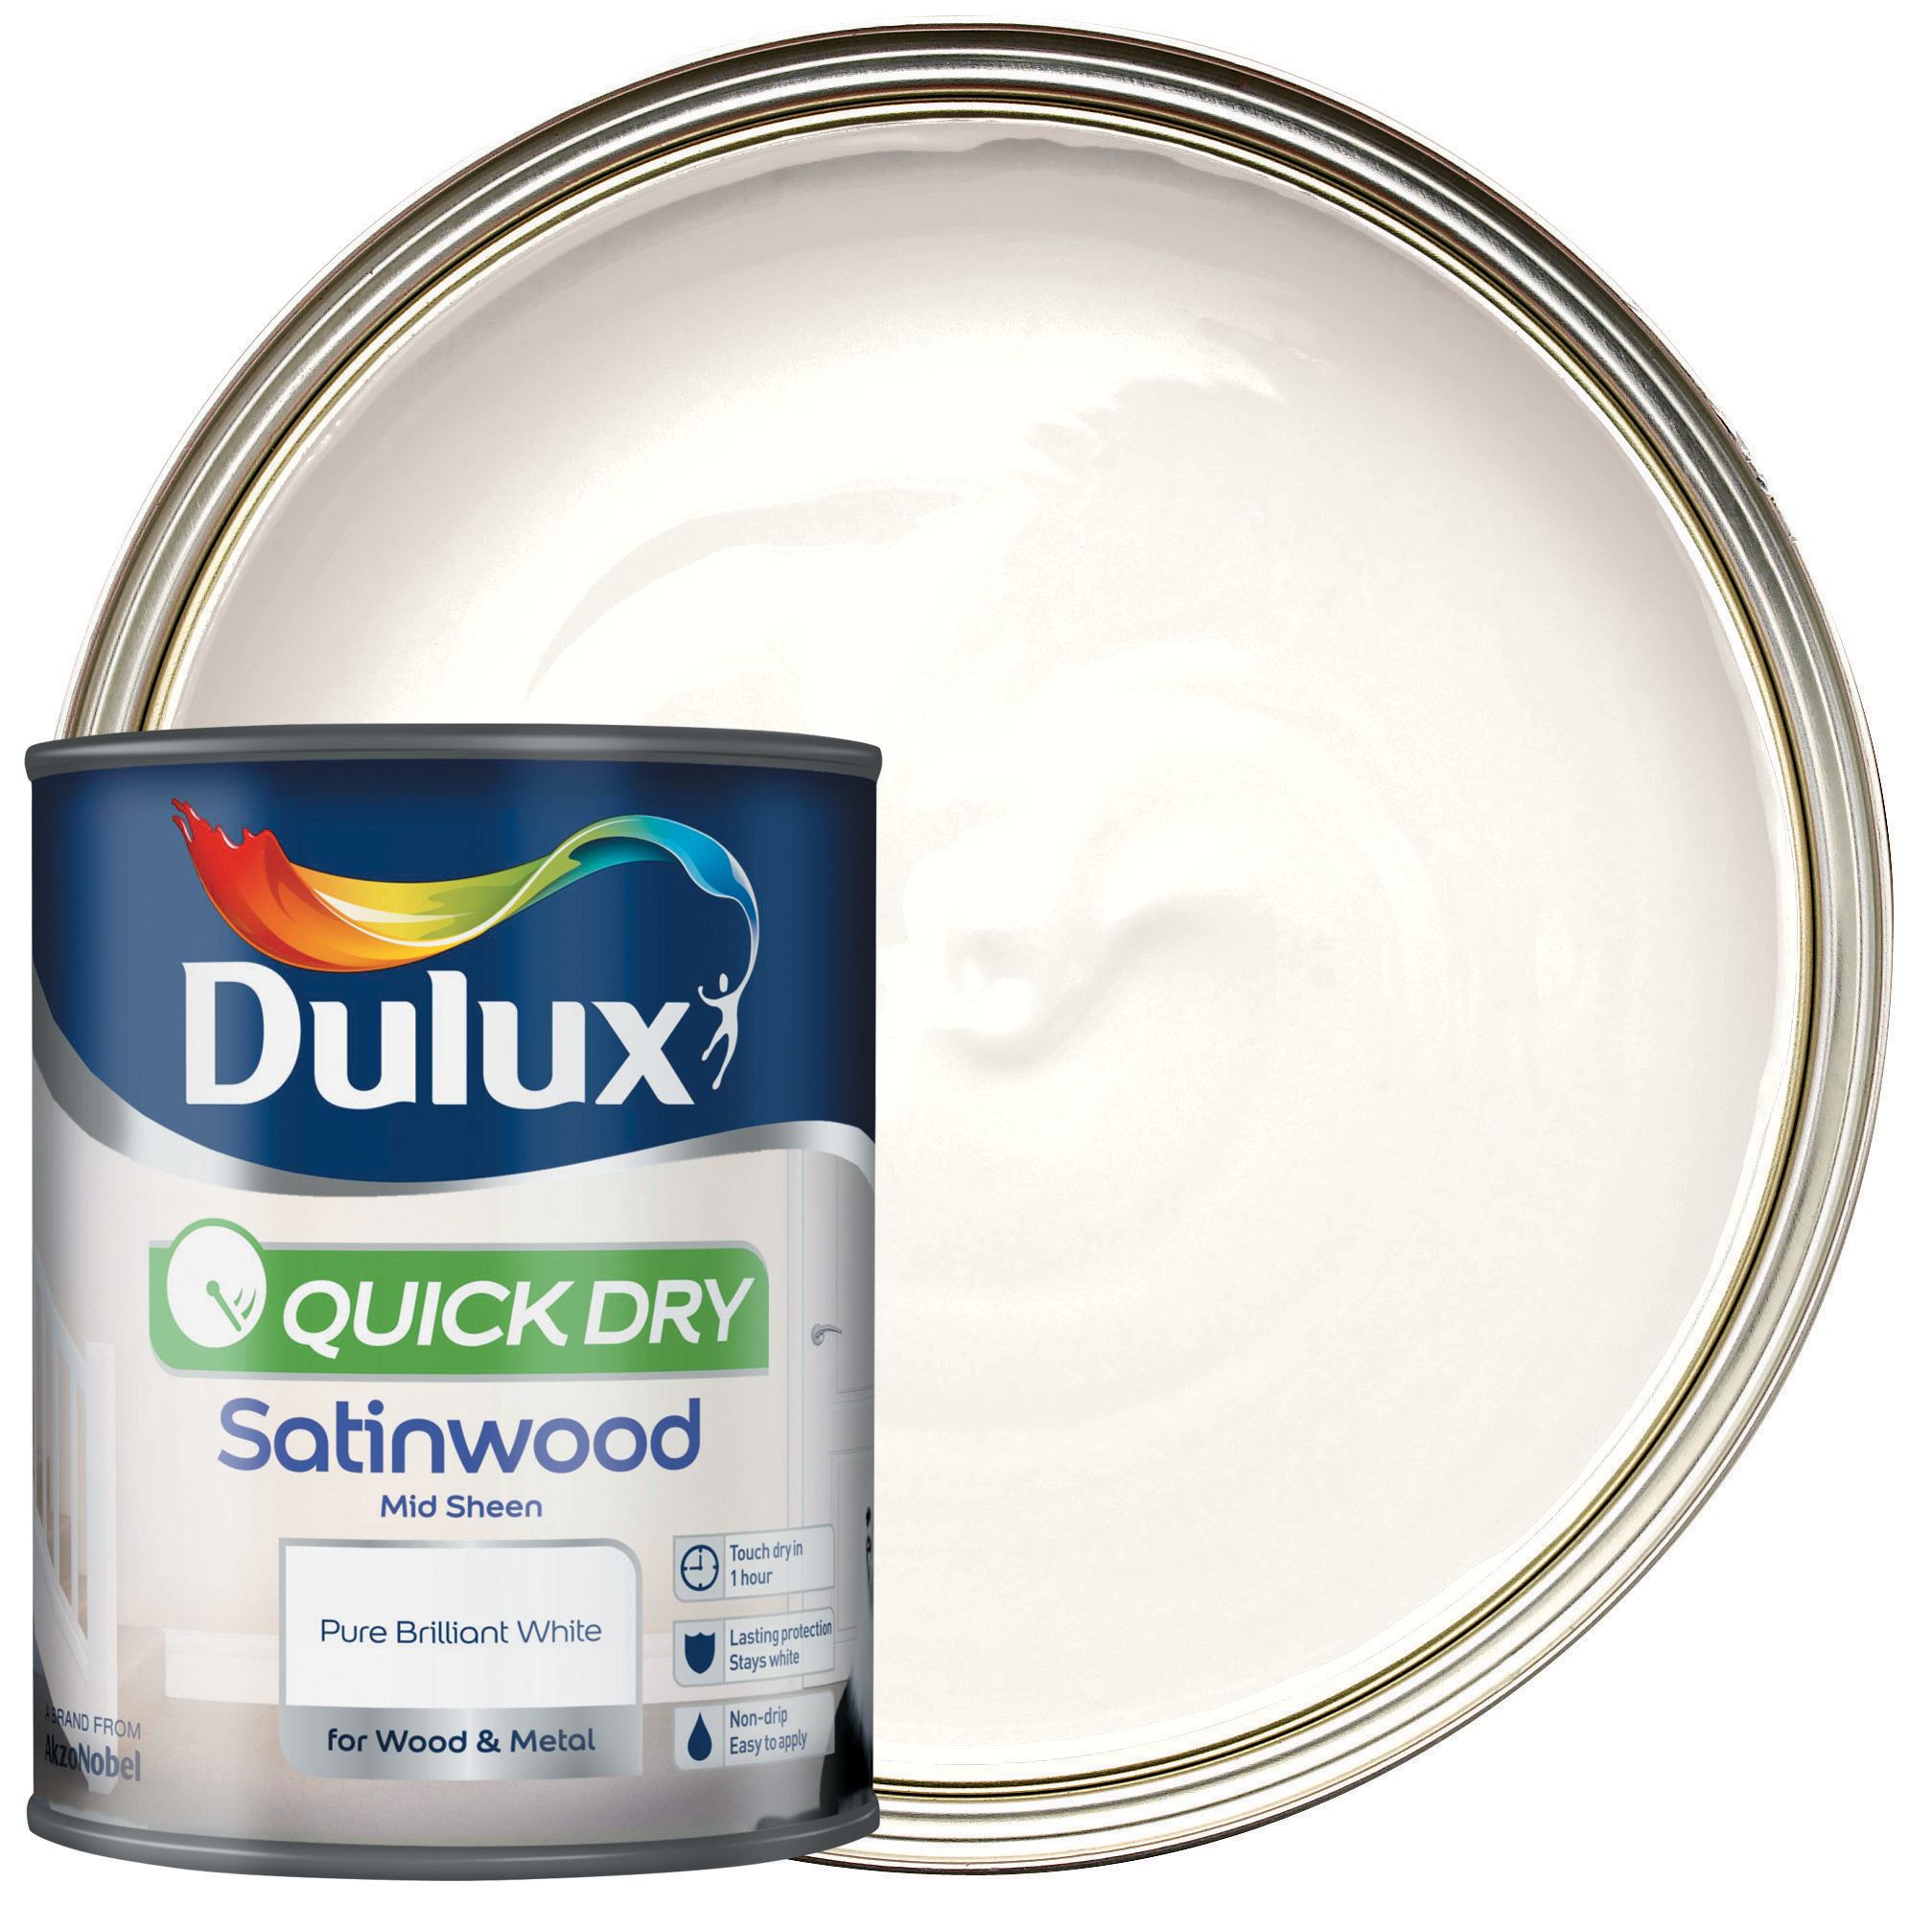 Image of Dulux Quick Dry Satinwood Paint - Pure Brilliant White 750ml